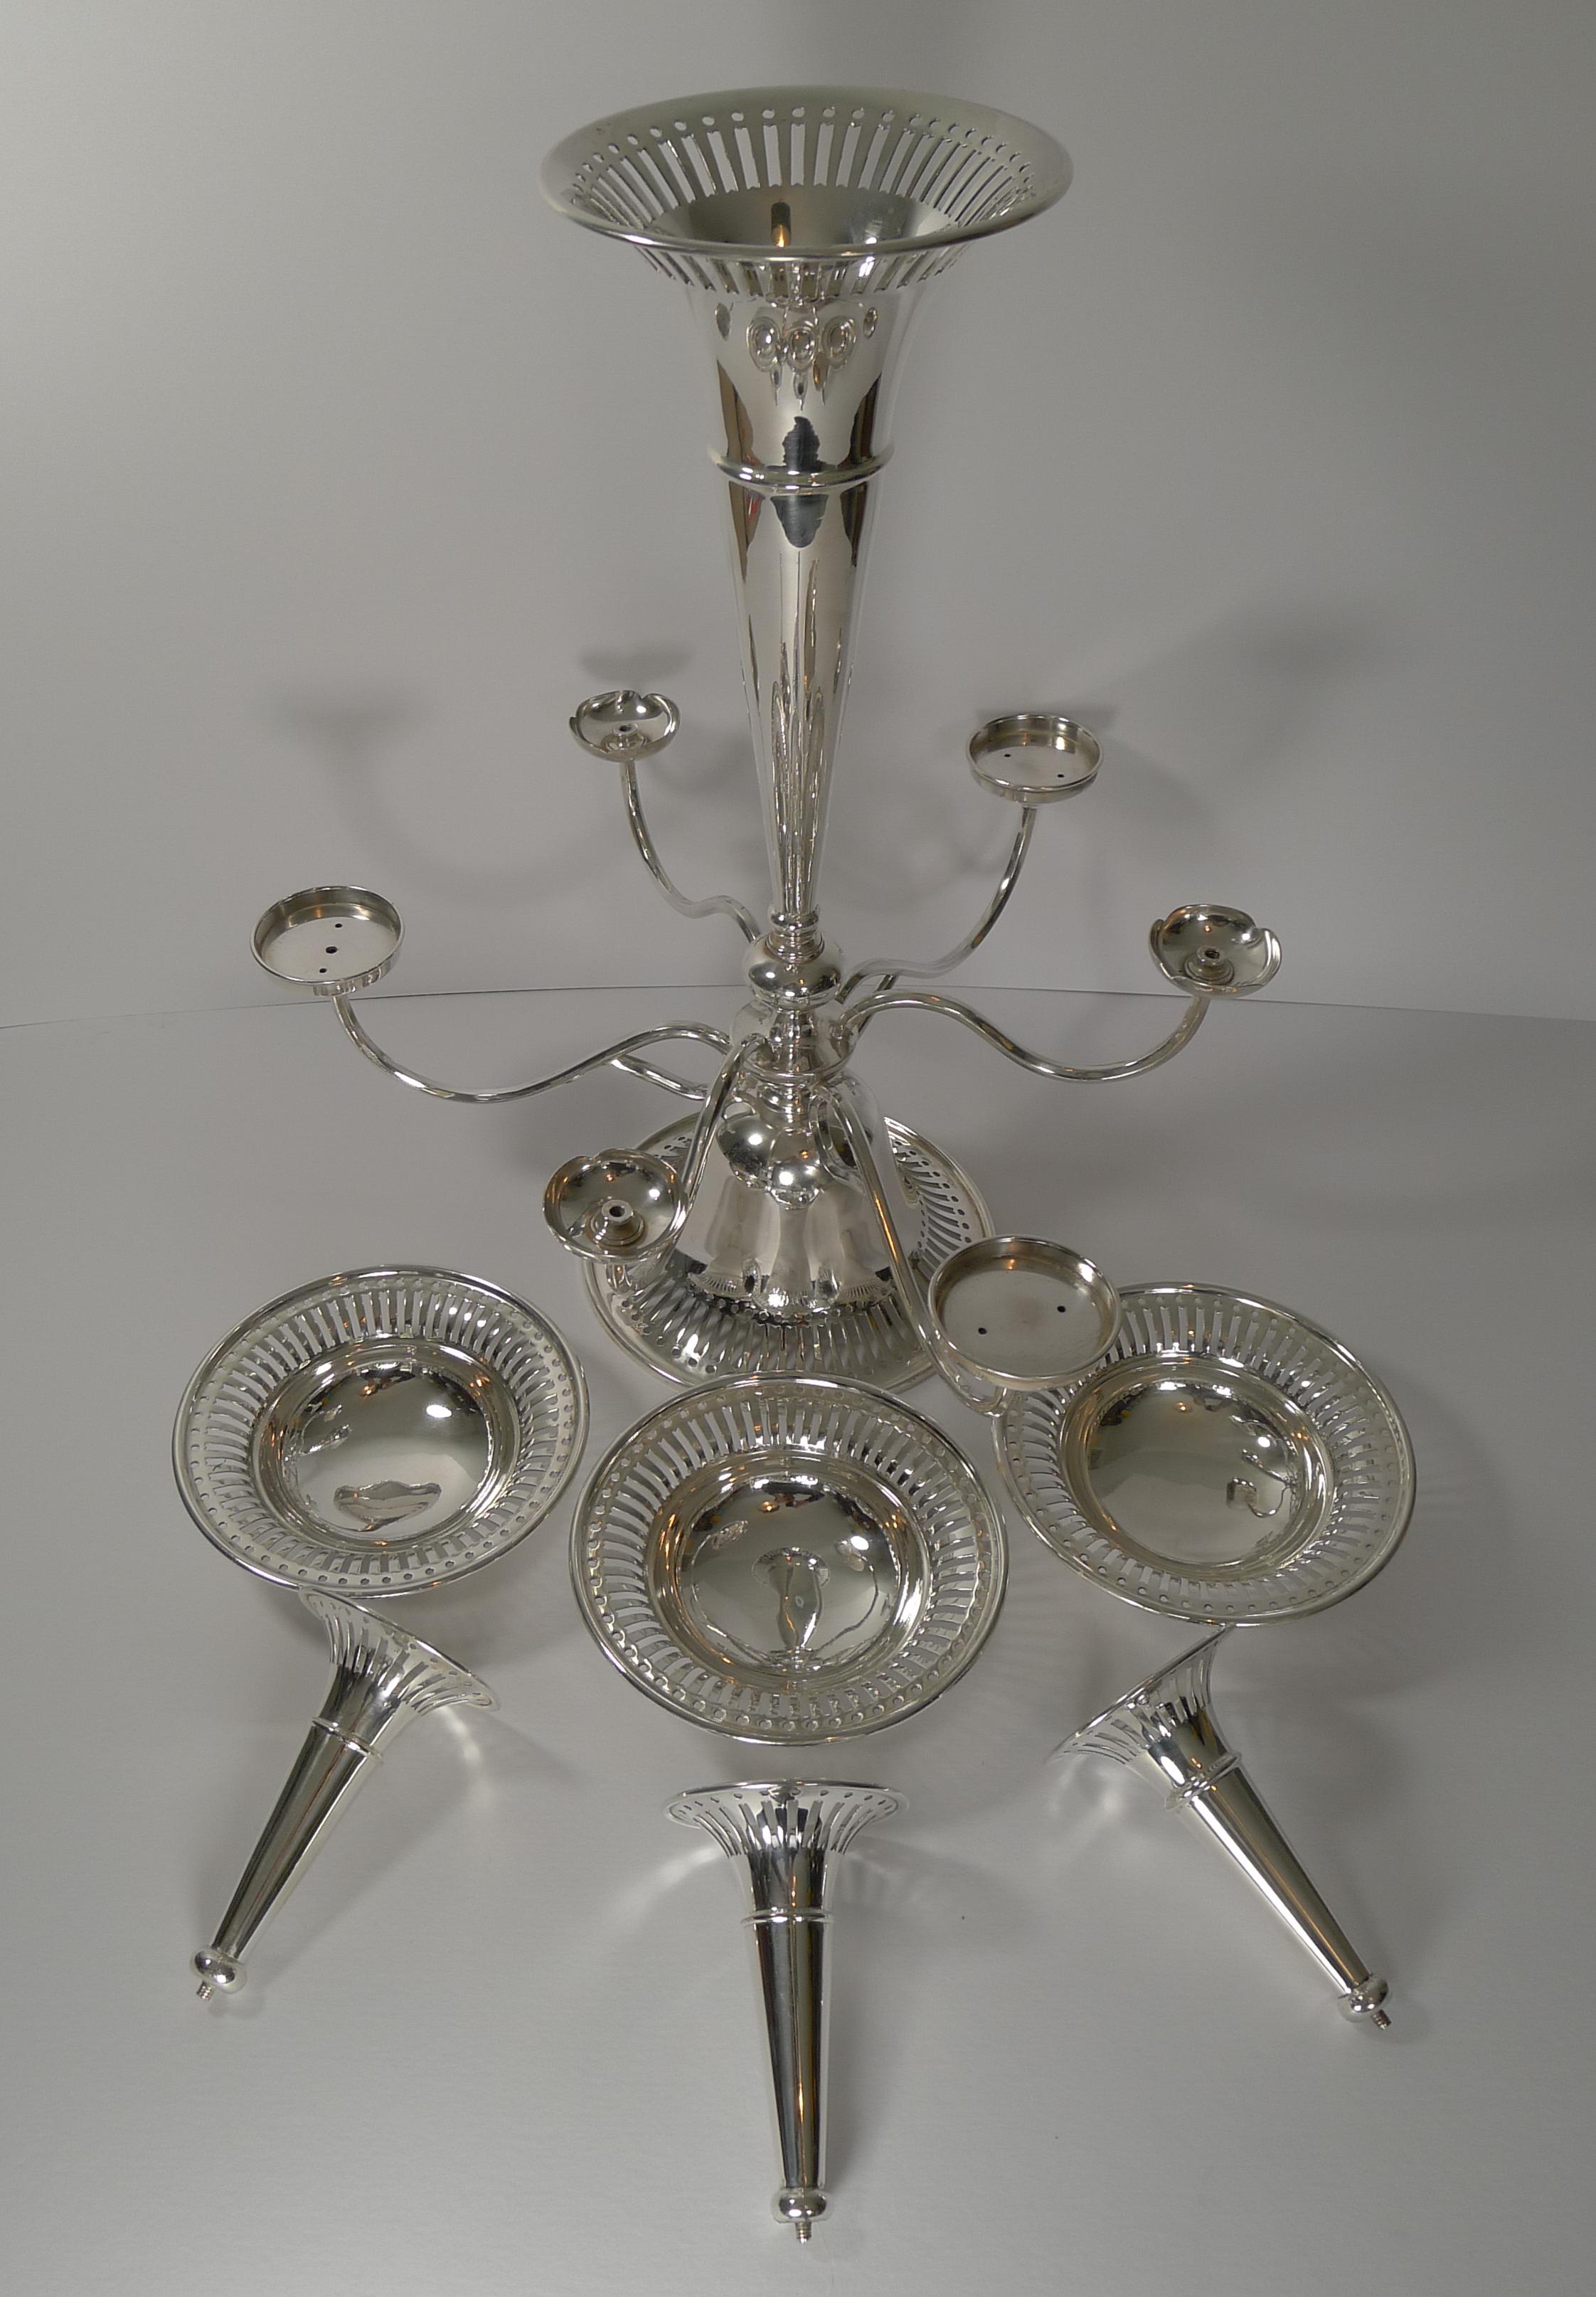 A handsome centrepiece / epergne dating to the early 20th century, circa 1910.

A grand and impressive piece which once filled and dressed would look outstanding in the dining room.

Excellent condition measuring approximately 17